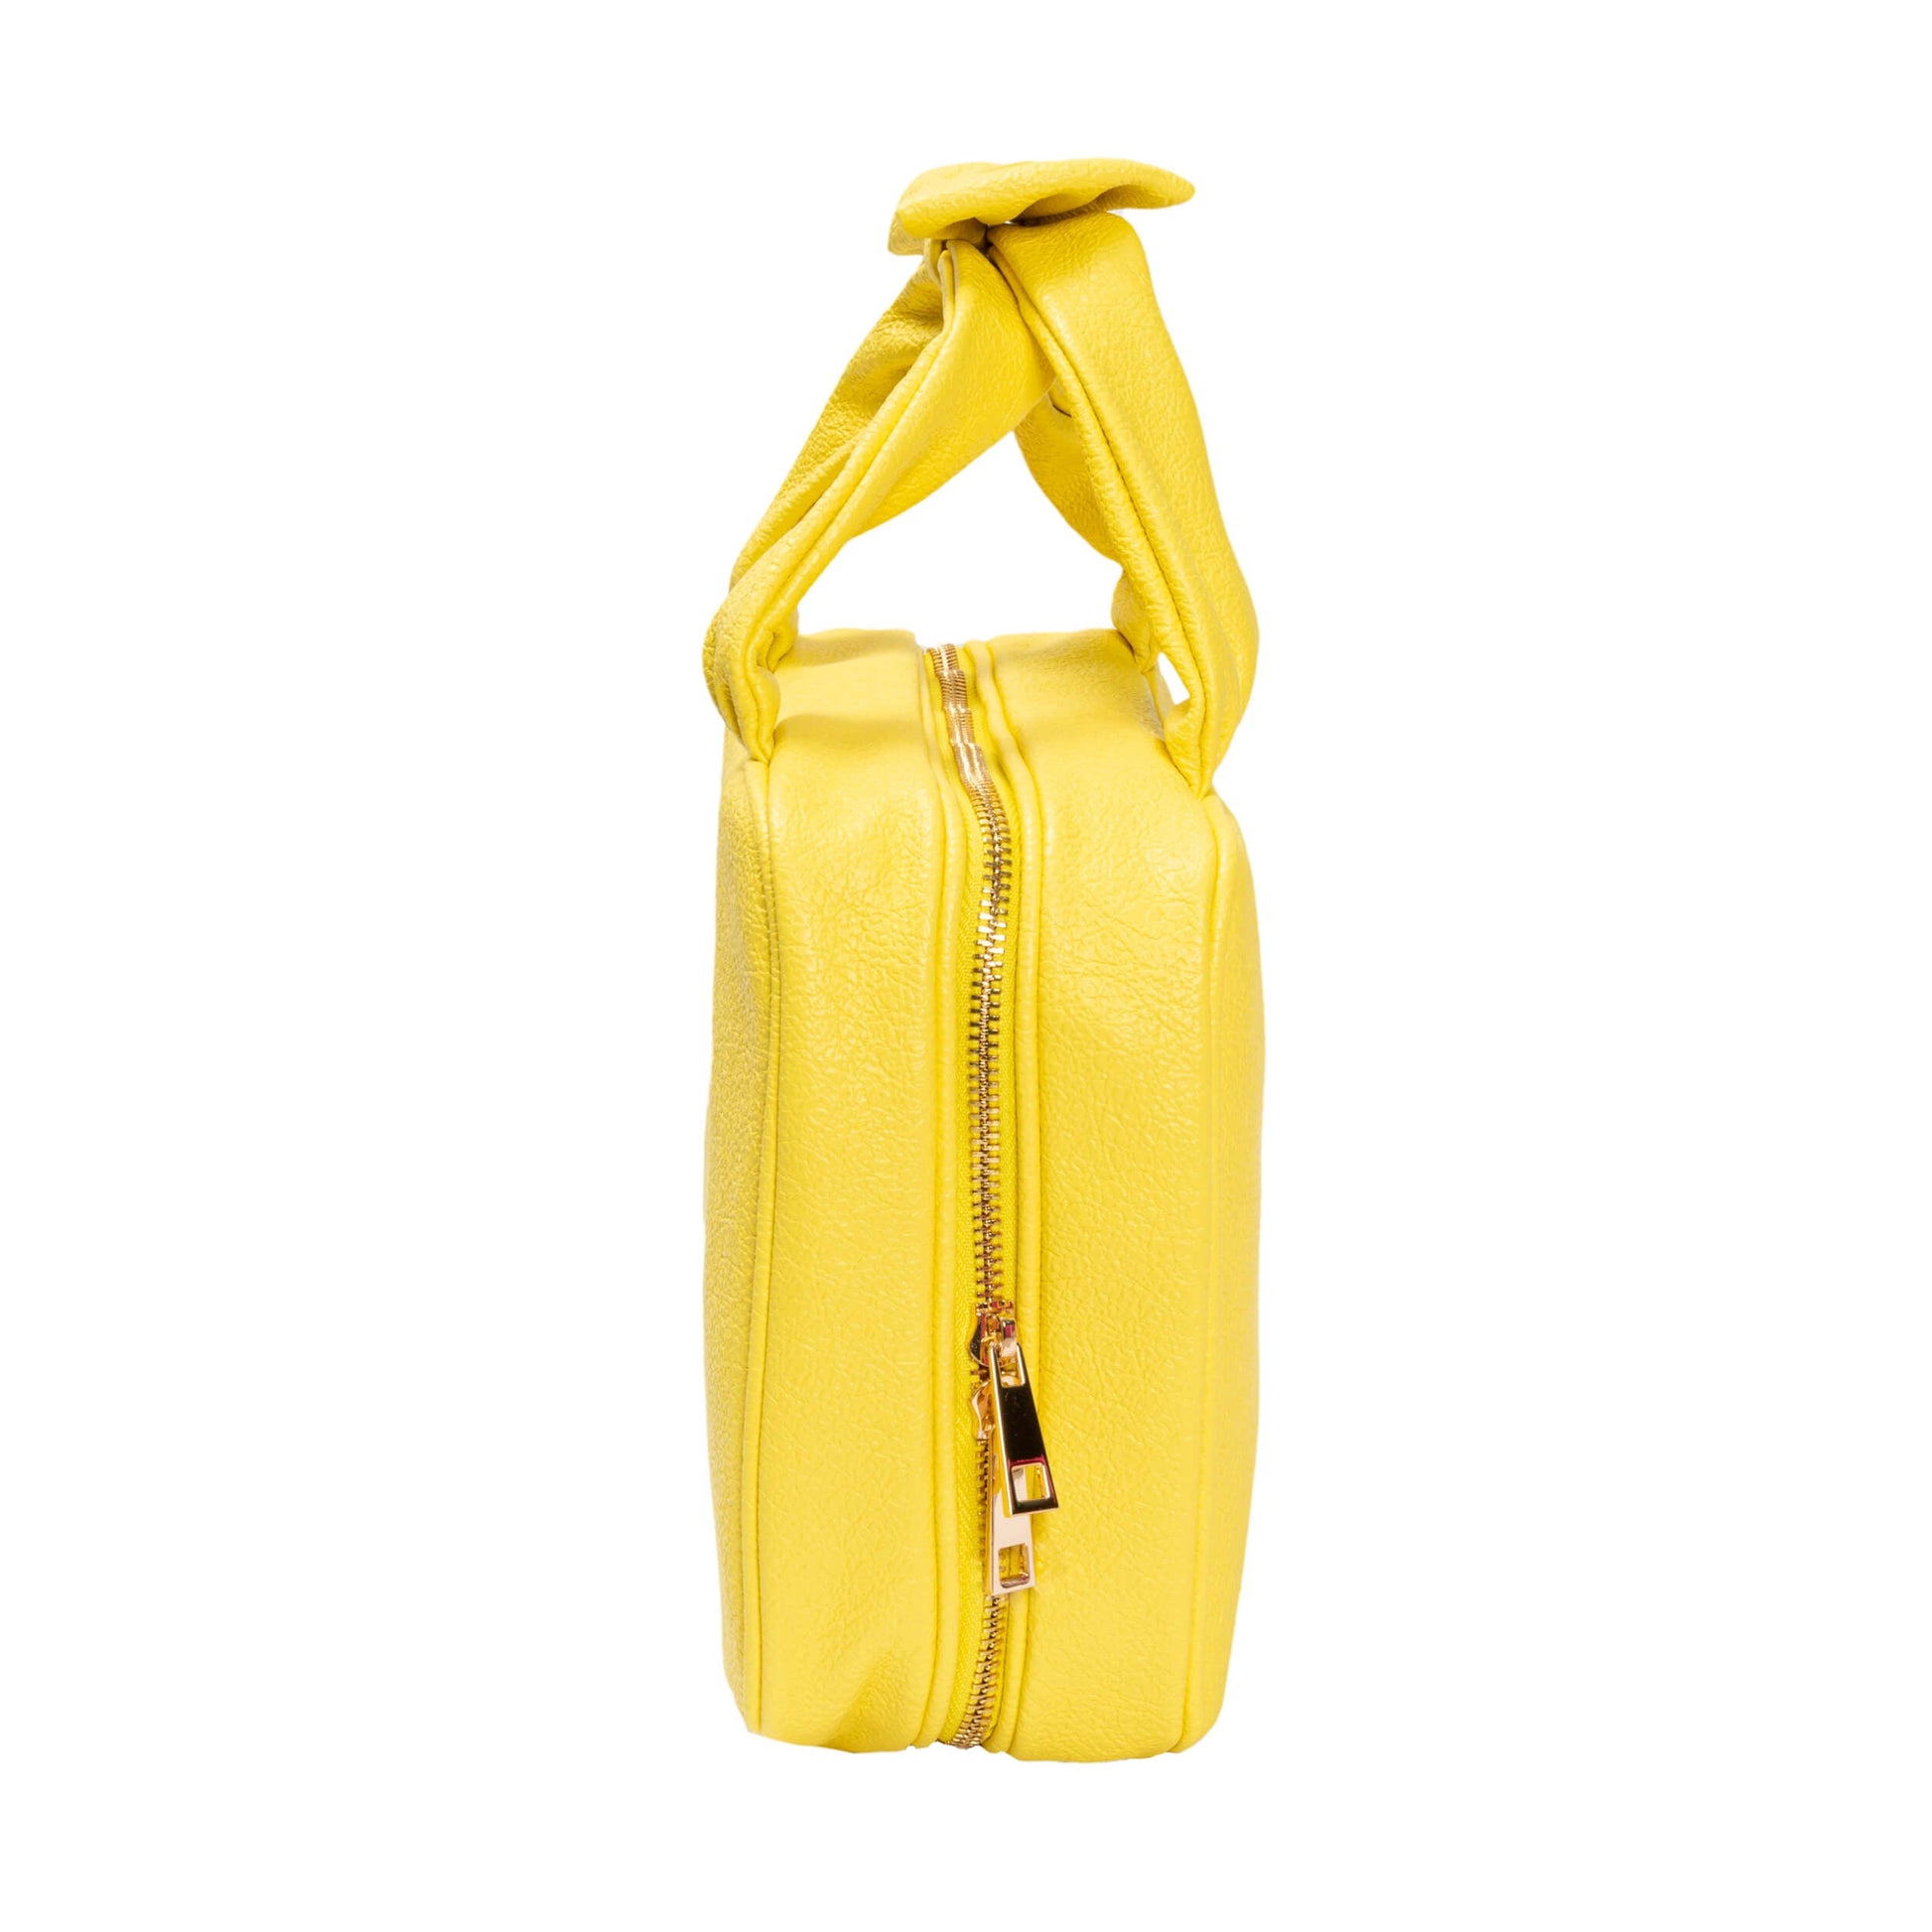 Leah suitcase - Bright Yellow (Customizable)